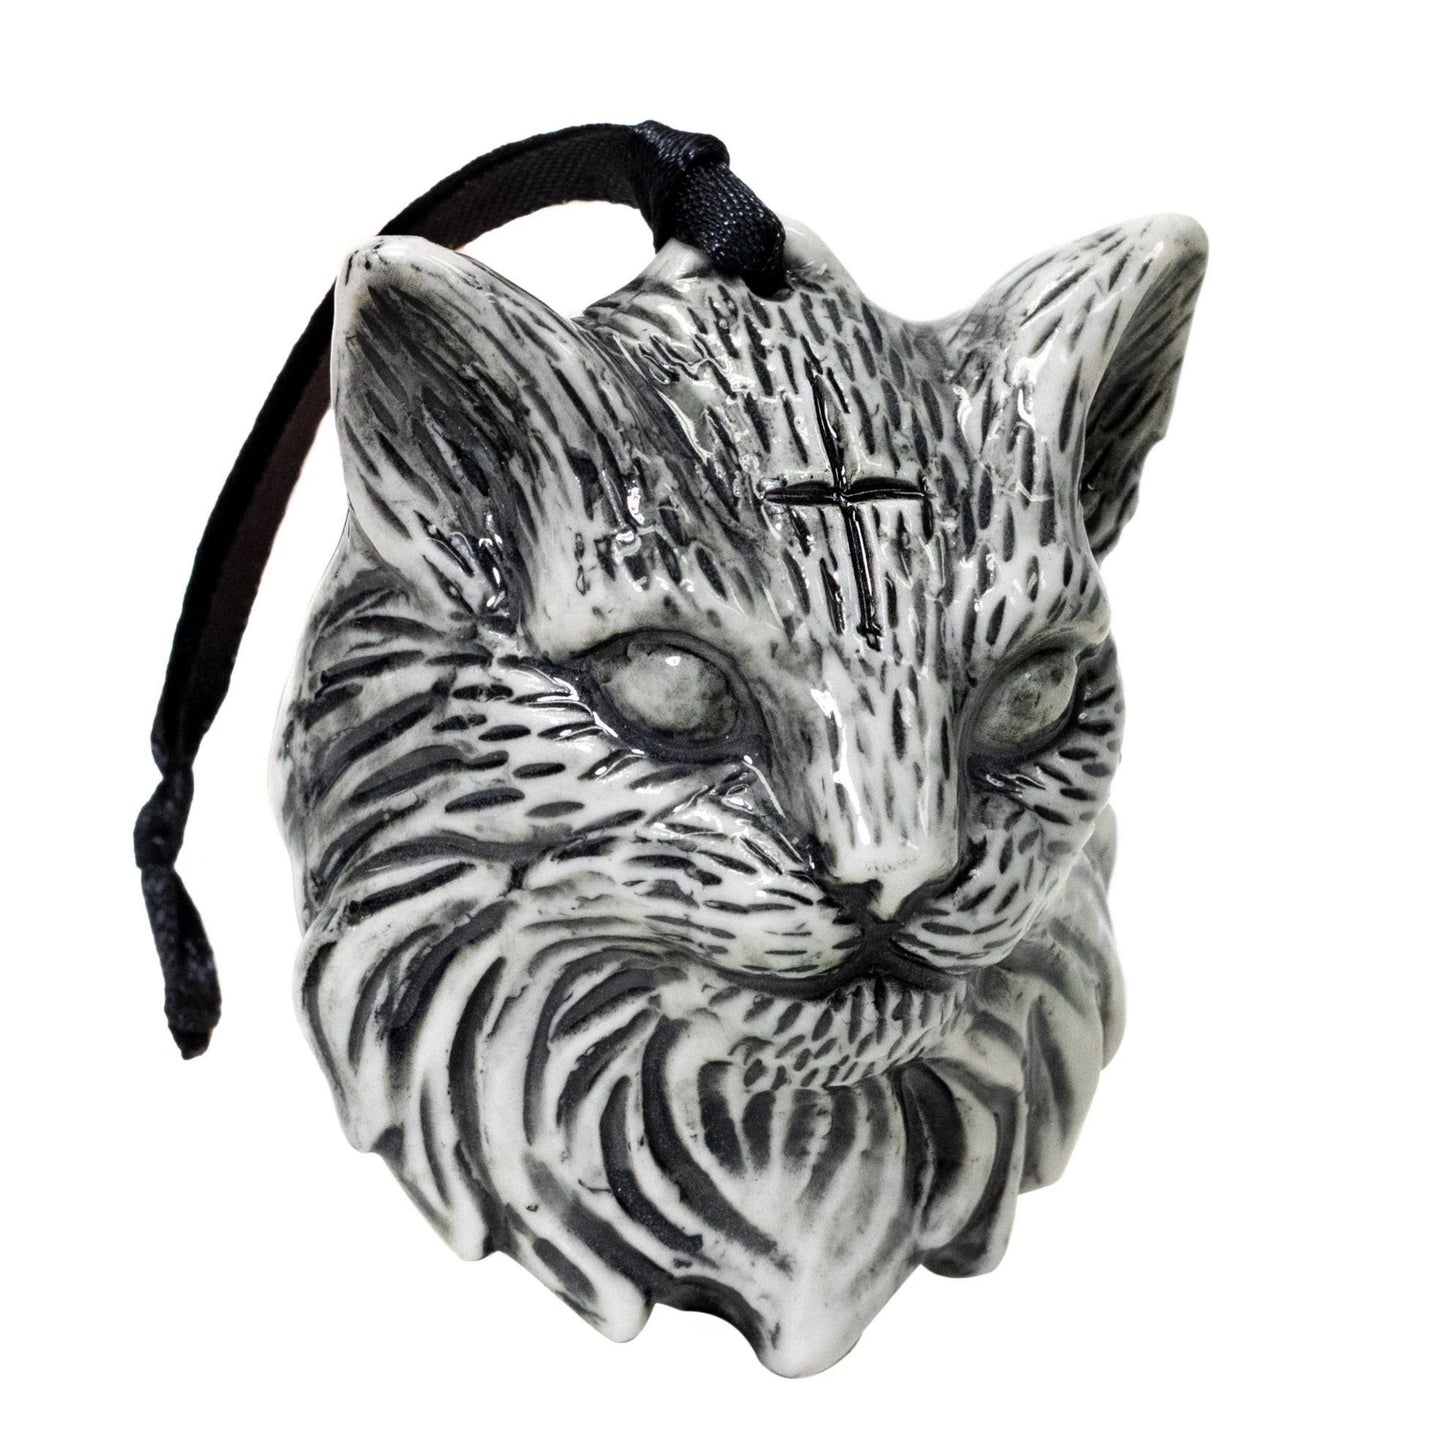 Lucipurr - Ceramic Ornament | Black and White Cat With Cross - Blackcraft Cult - Ornaments